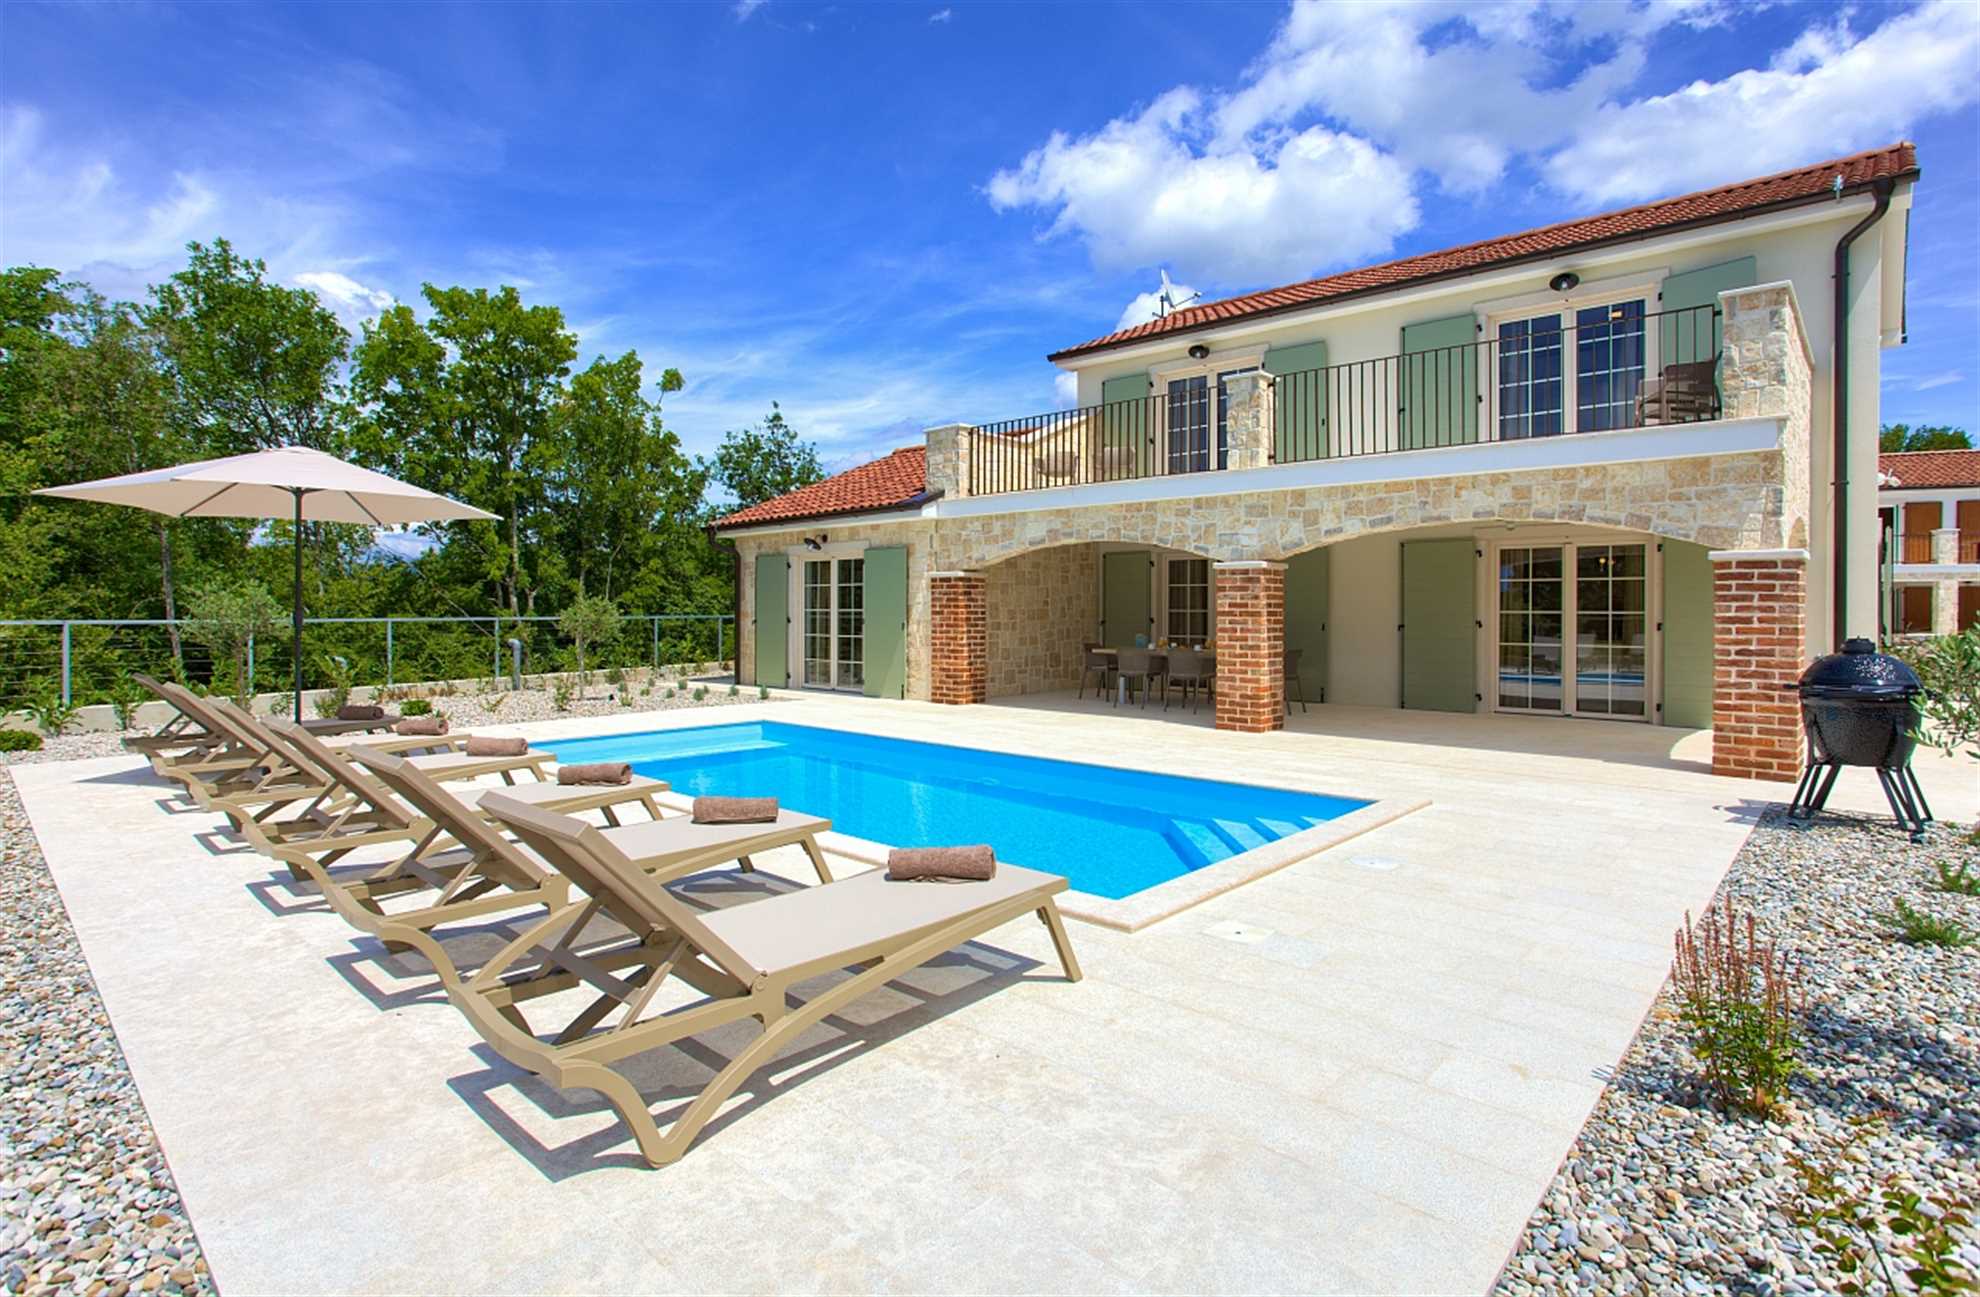 Charming Villa Adria with heated swimming pool